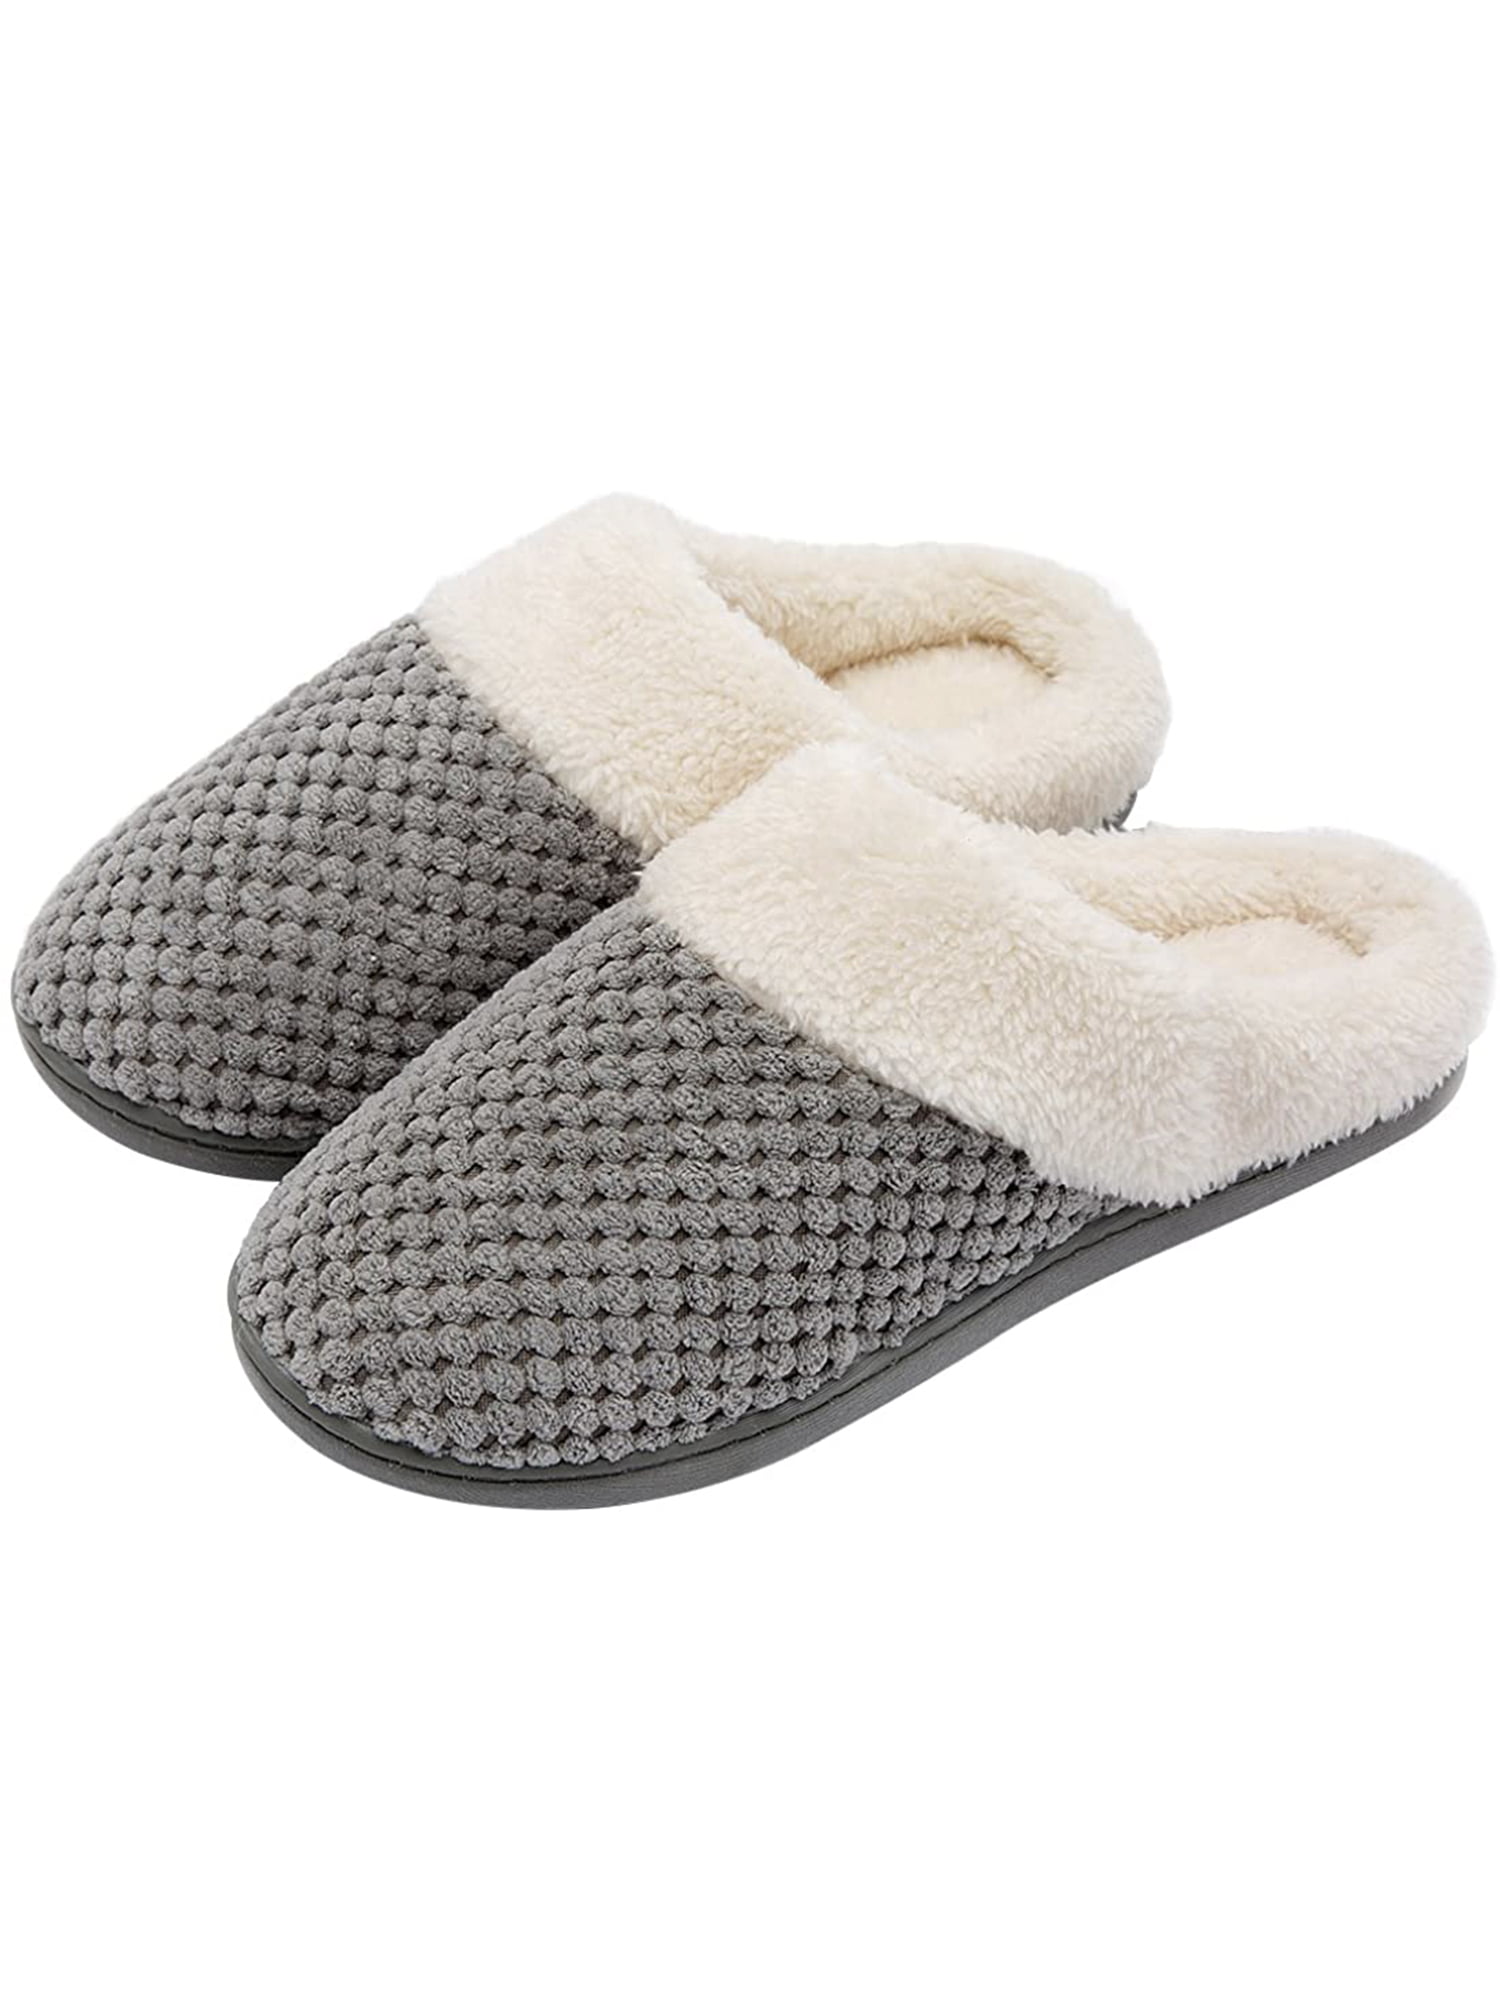 house shoes with memory foam